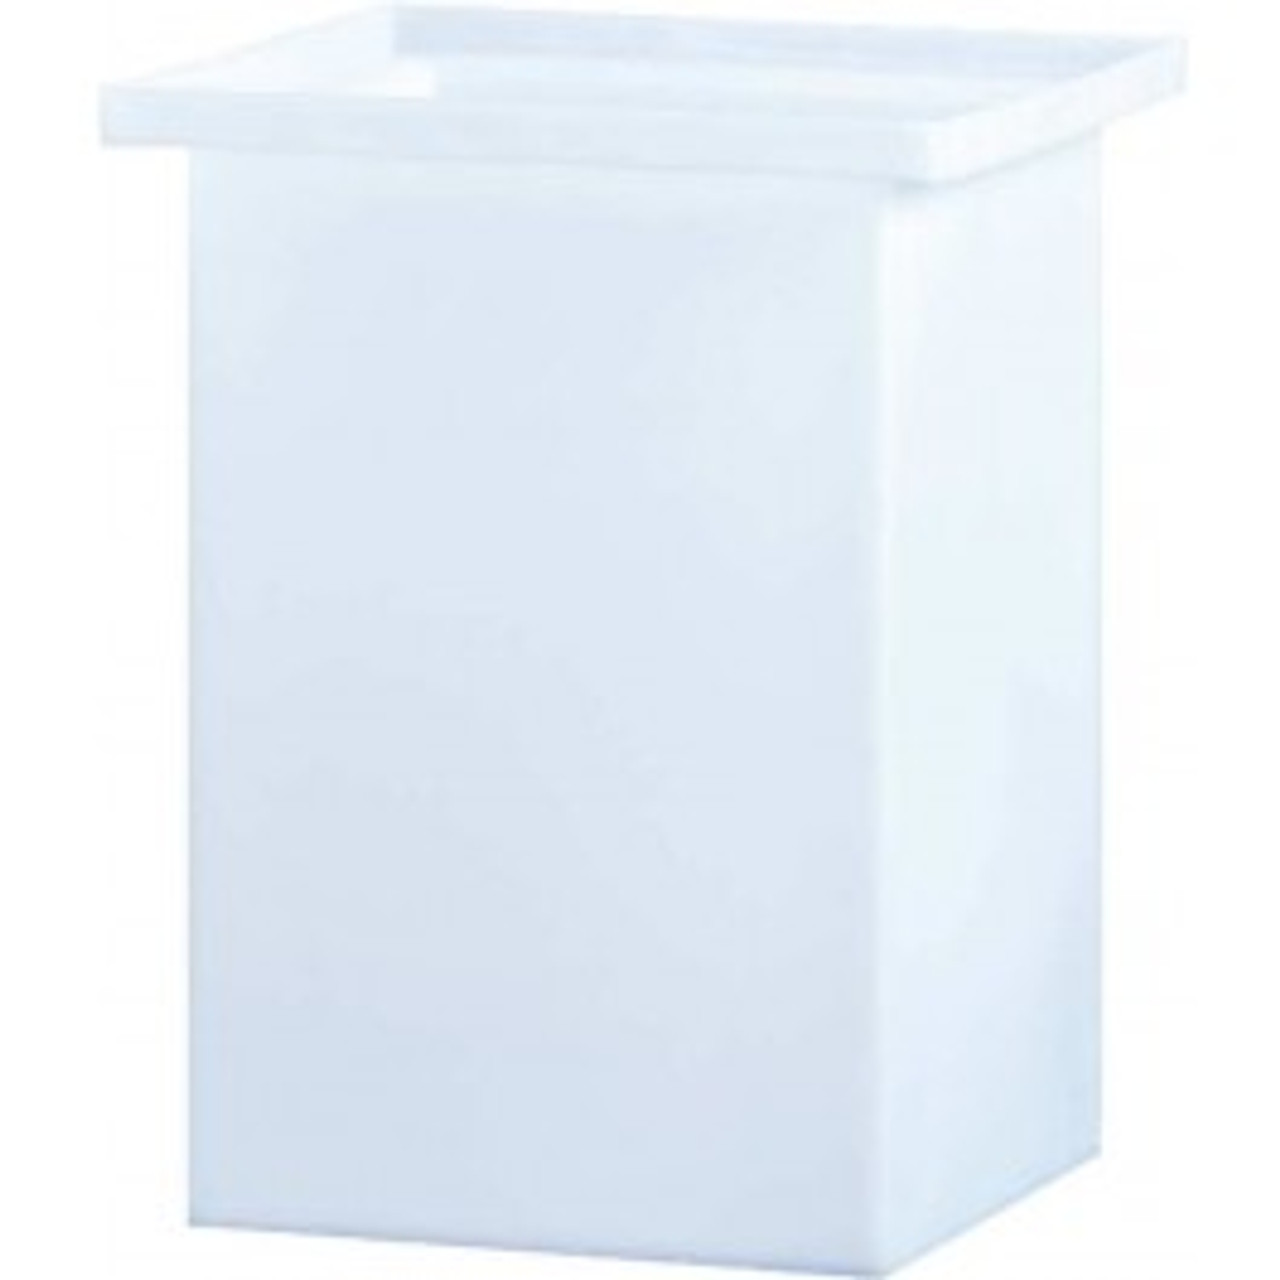 An image of a 50 Gallon PE Chem-Tainer White Rectangular Open Top Tank | R181836A